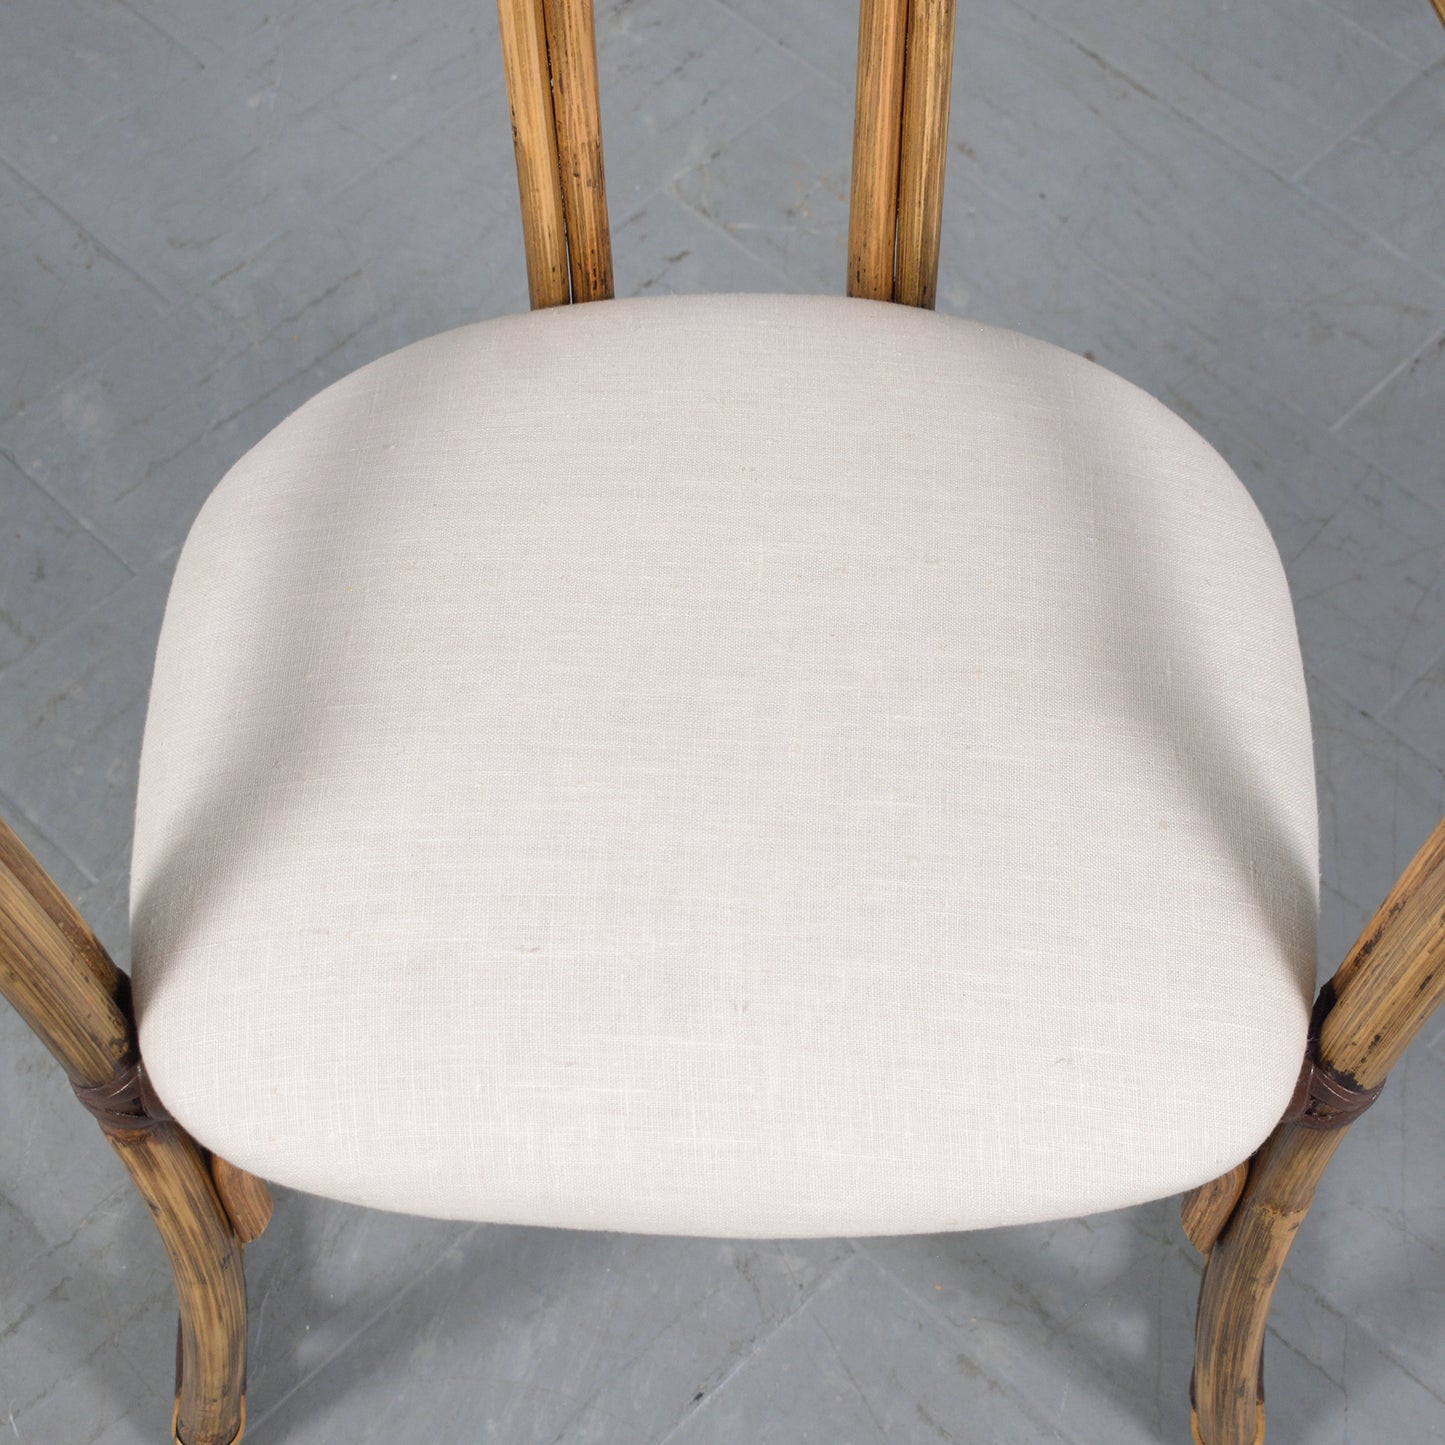 Restored Vintage Pair of Bamboo Barrel Chairs with Ivory Fabric